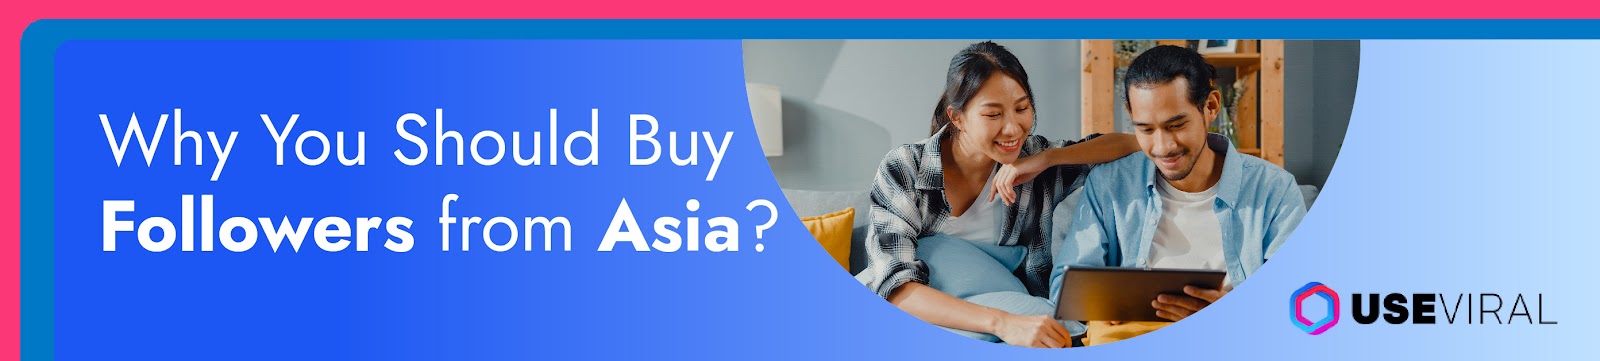 Why You Should Buy Followers from Asia?